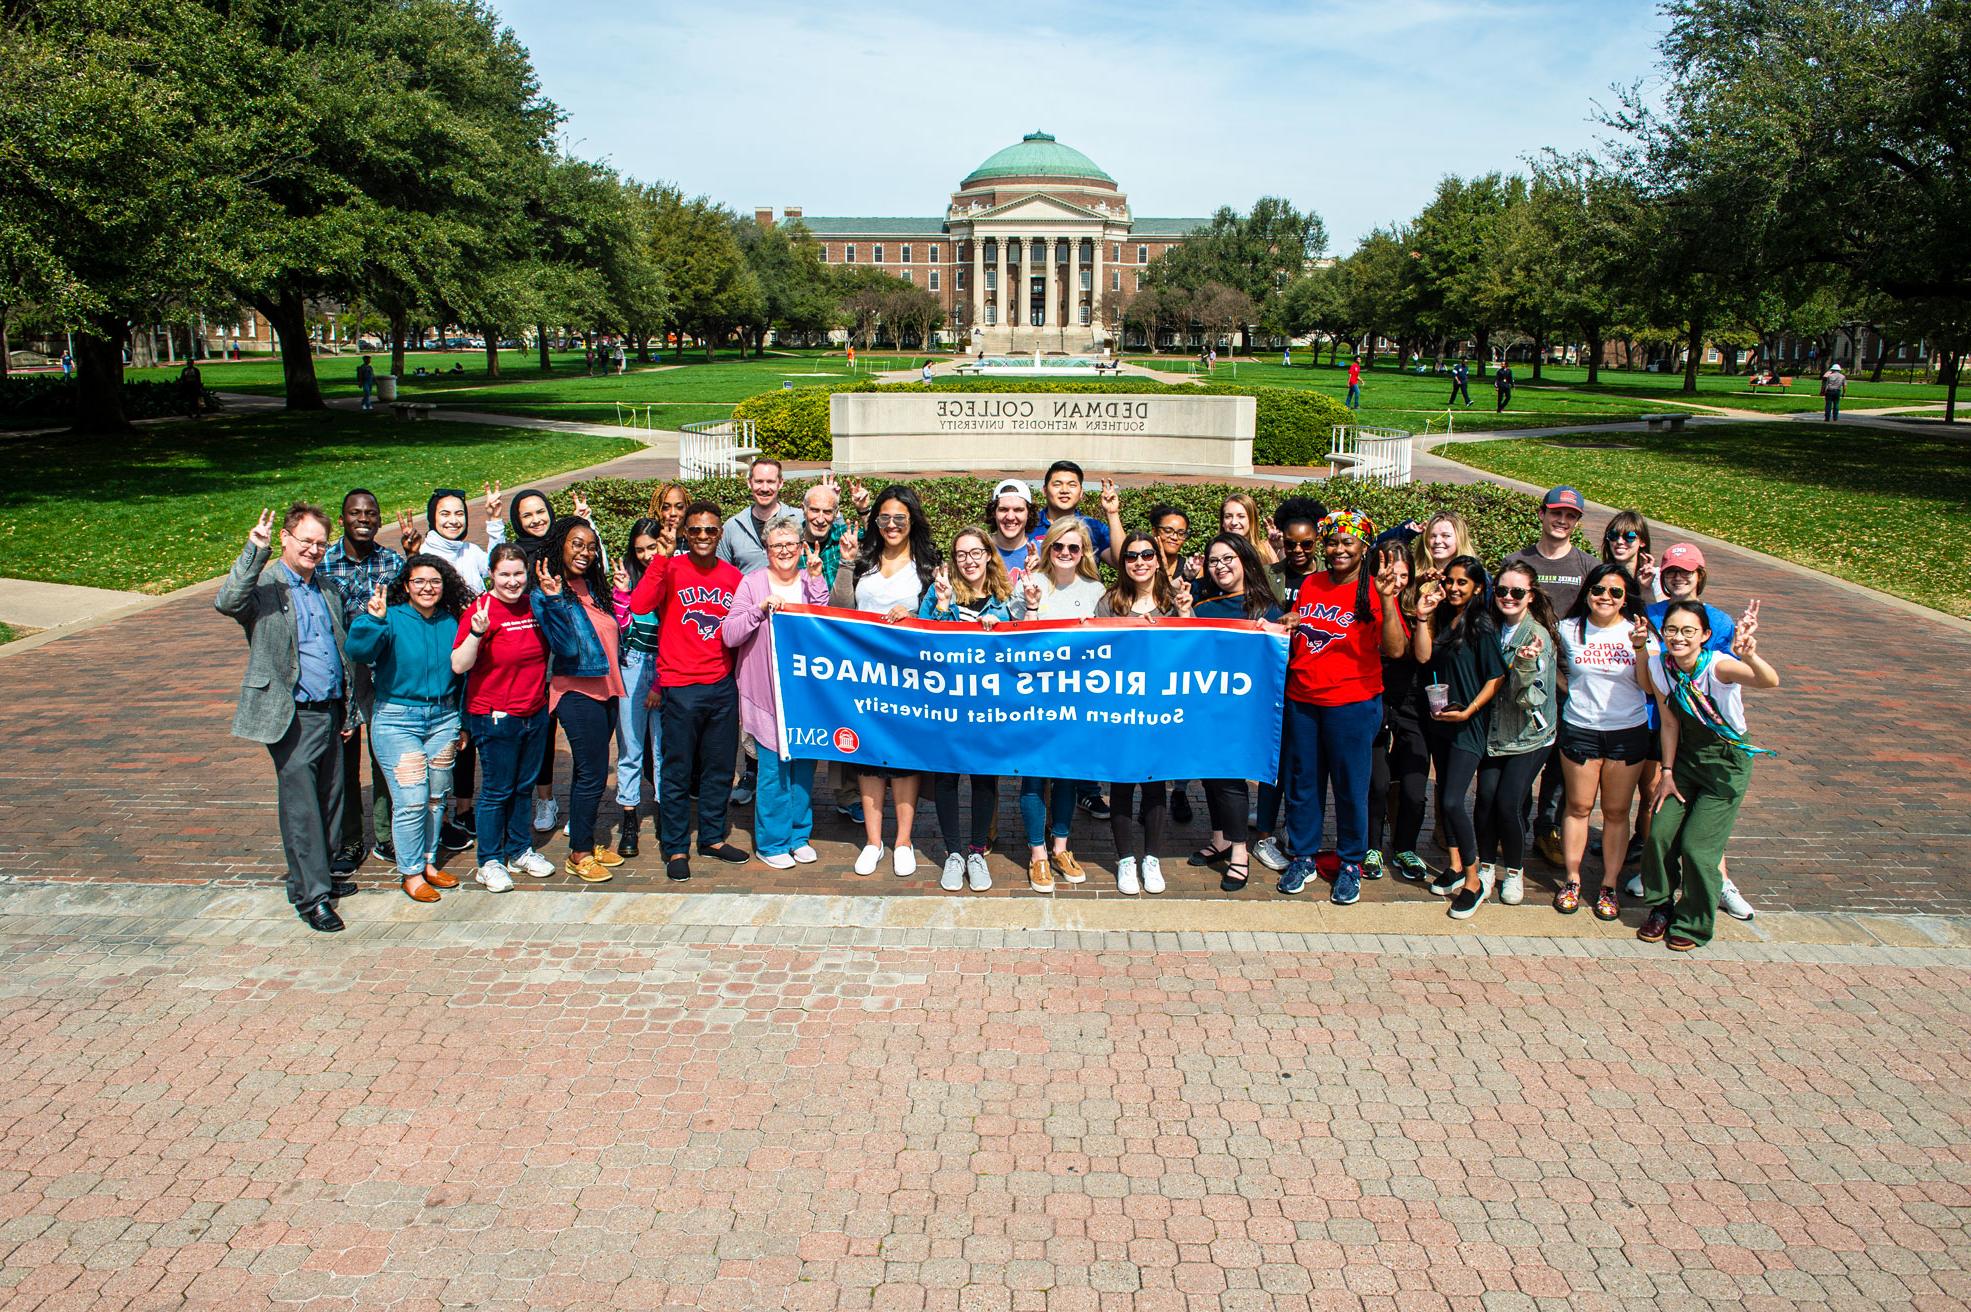 Civil Right Pilgrimage group photo in front of Dallas Hall